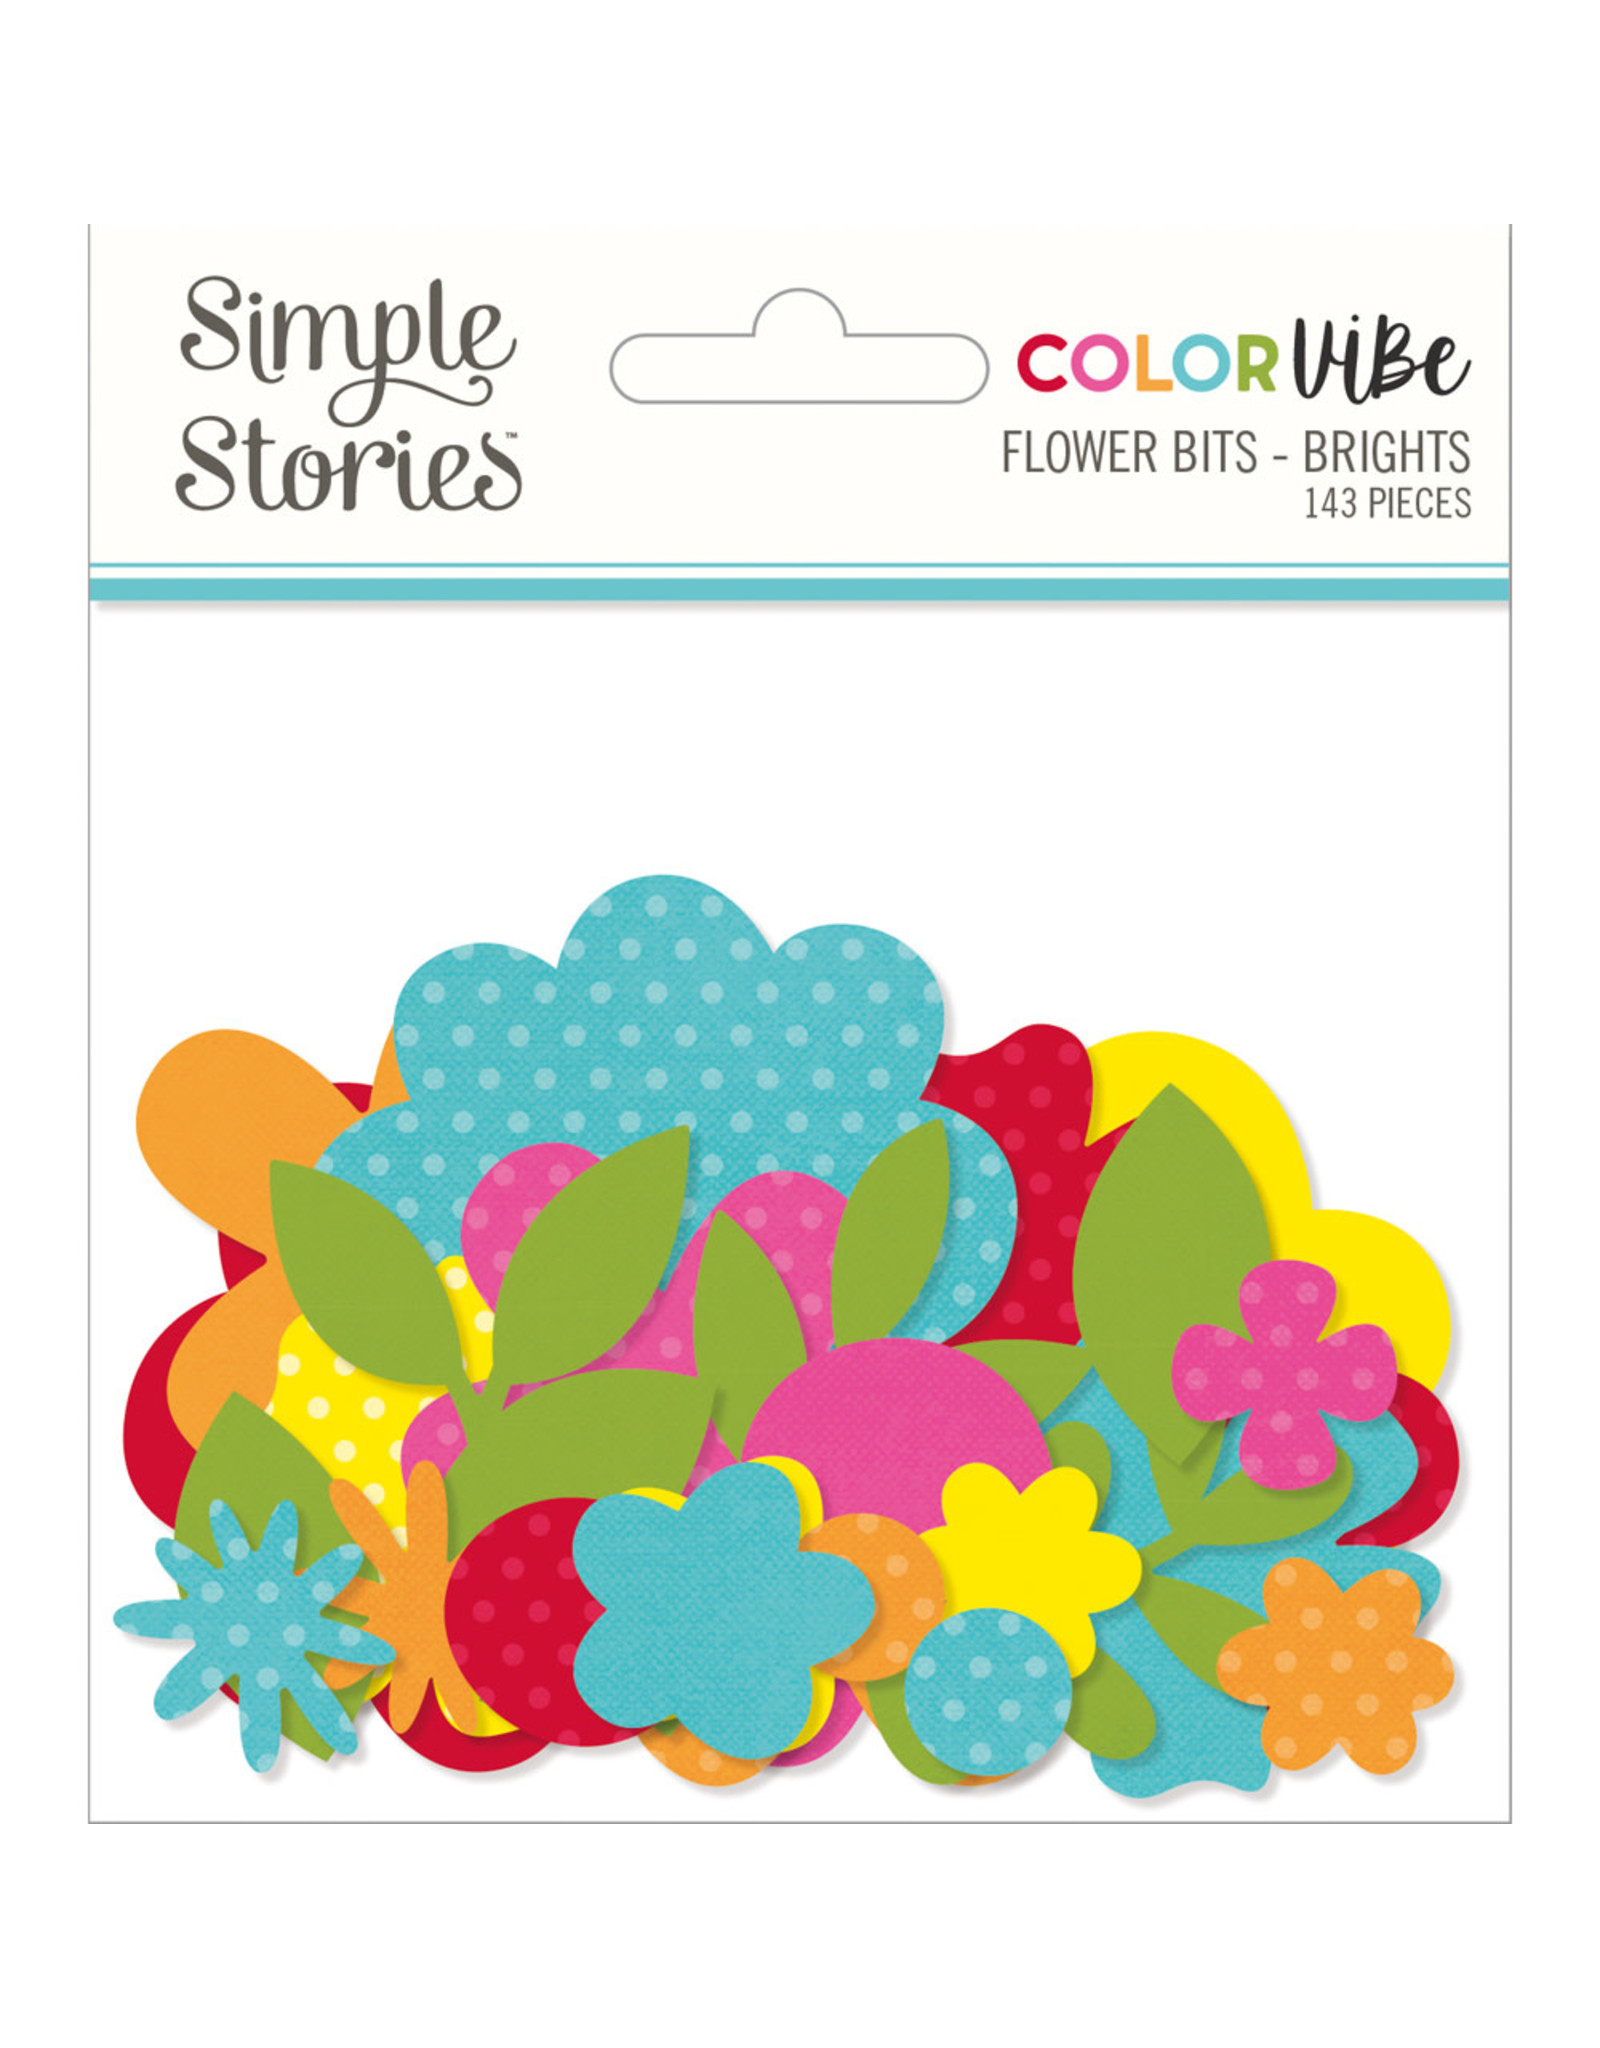 Simple Stories Color Vibe Flowers Bits & Pieces - Brights